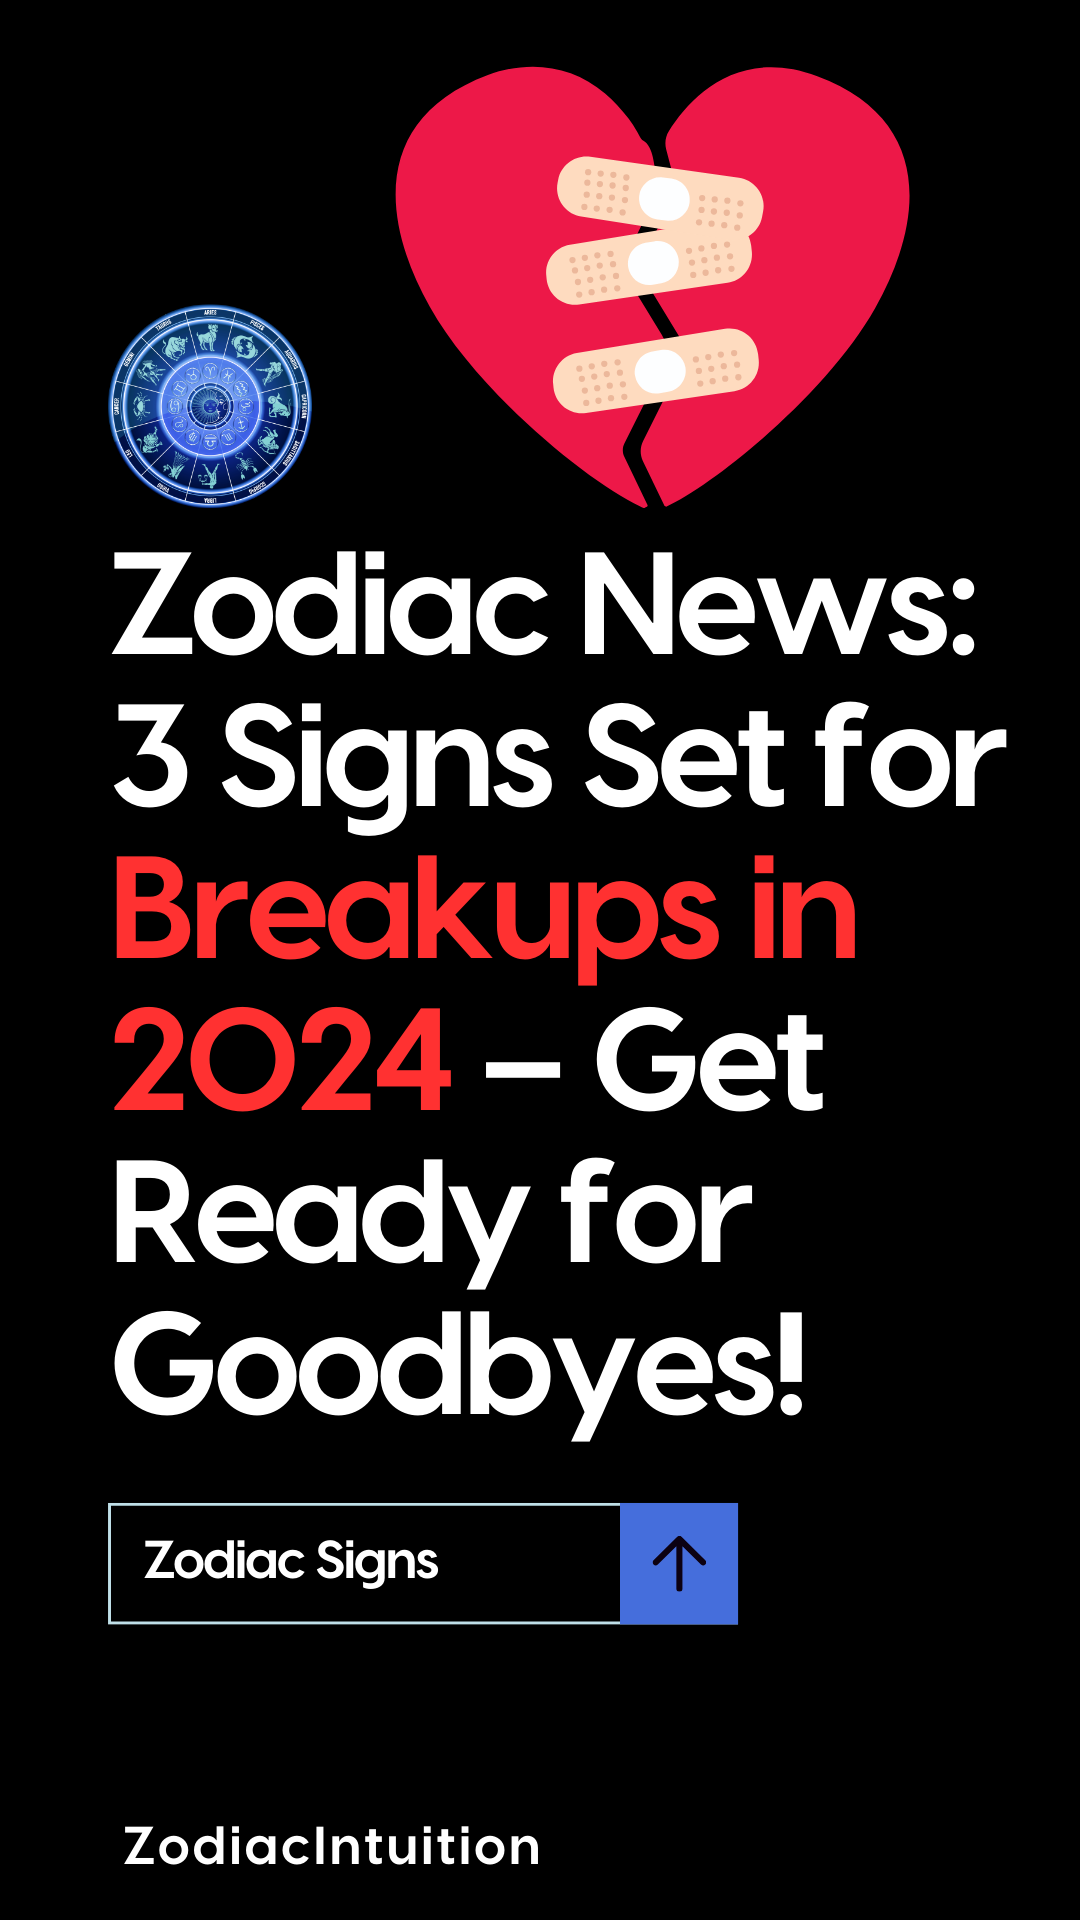 Zodiac News: 3 Signs Set for Breakups in 2024 – Get Ready for Goodbyes!